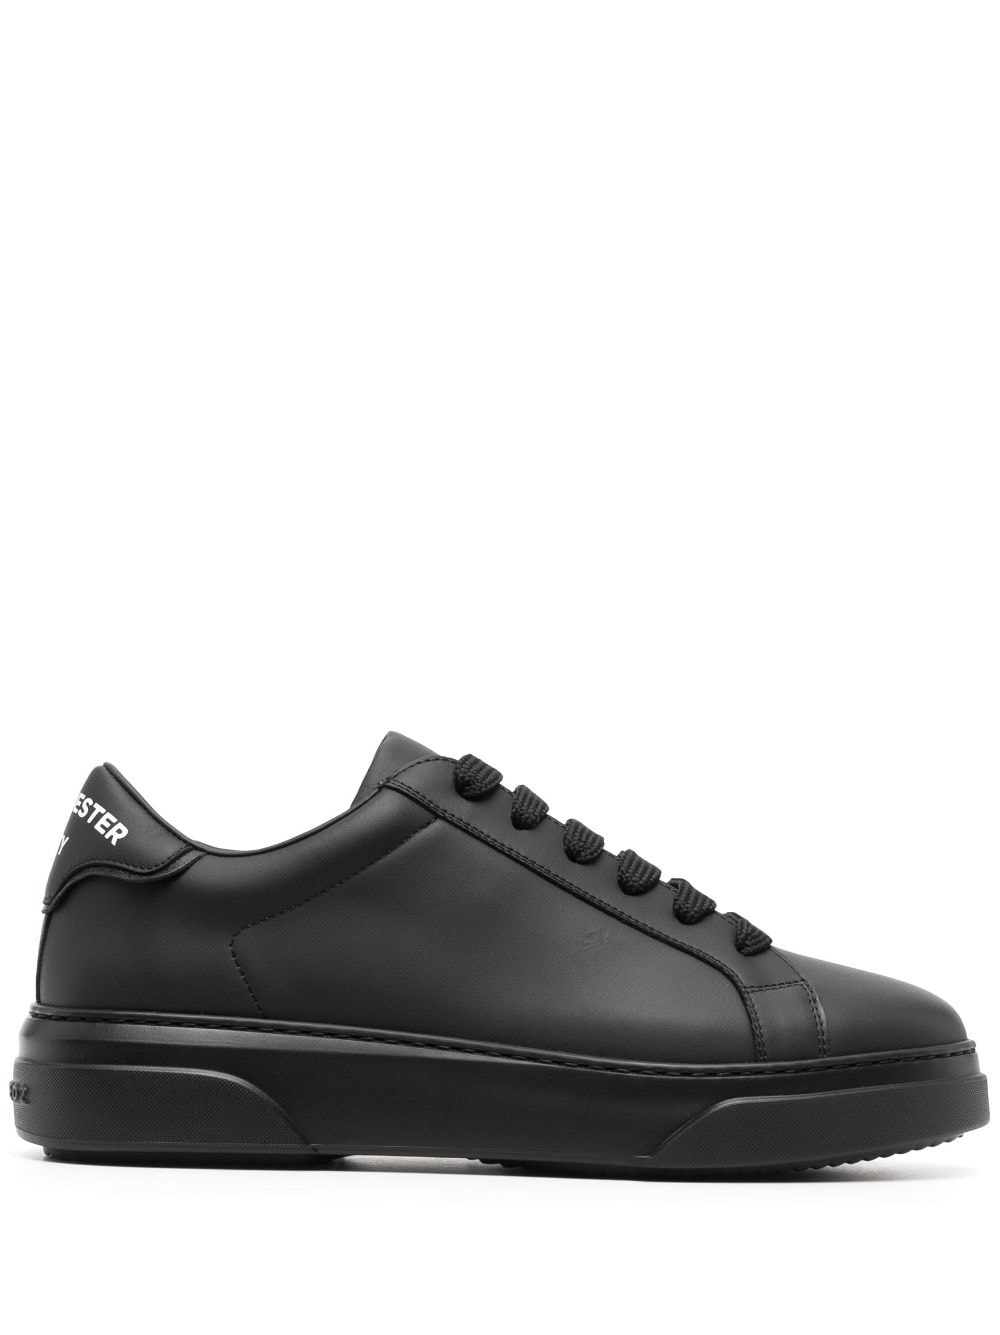 Dsquared2 x Manchester City low-top sneakers - Black